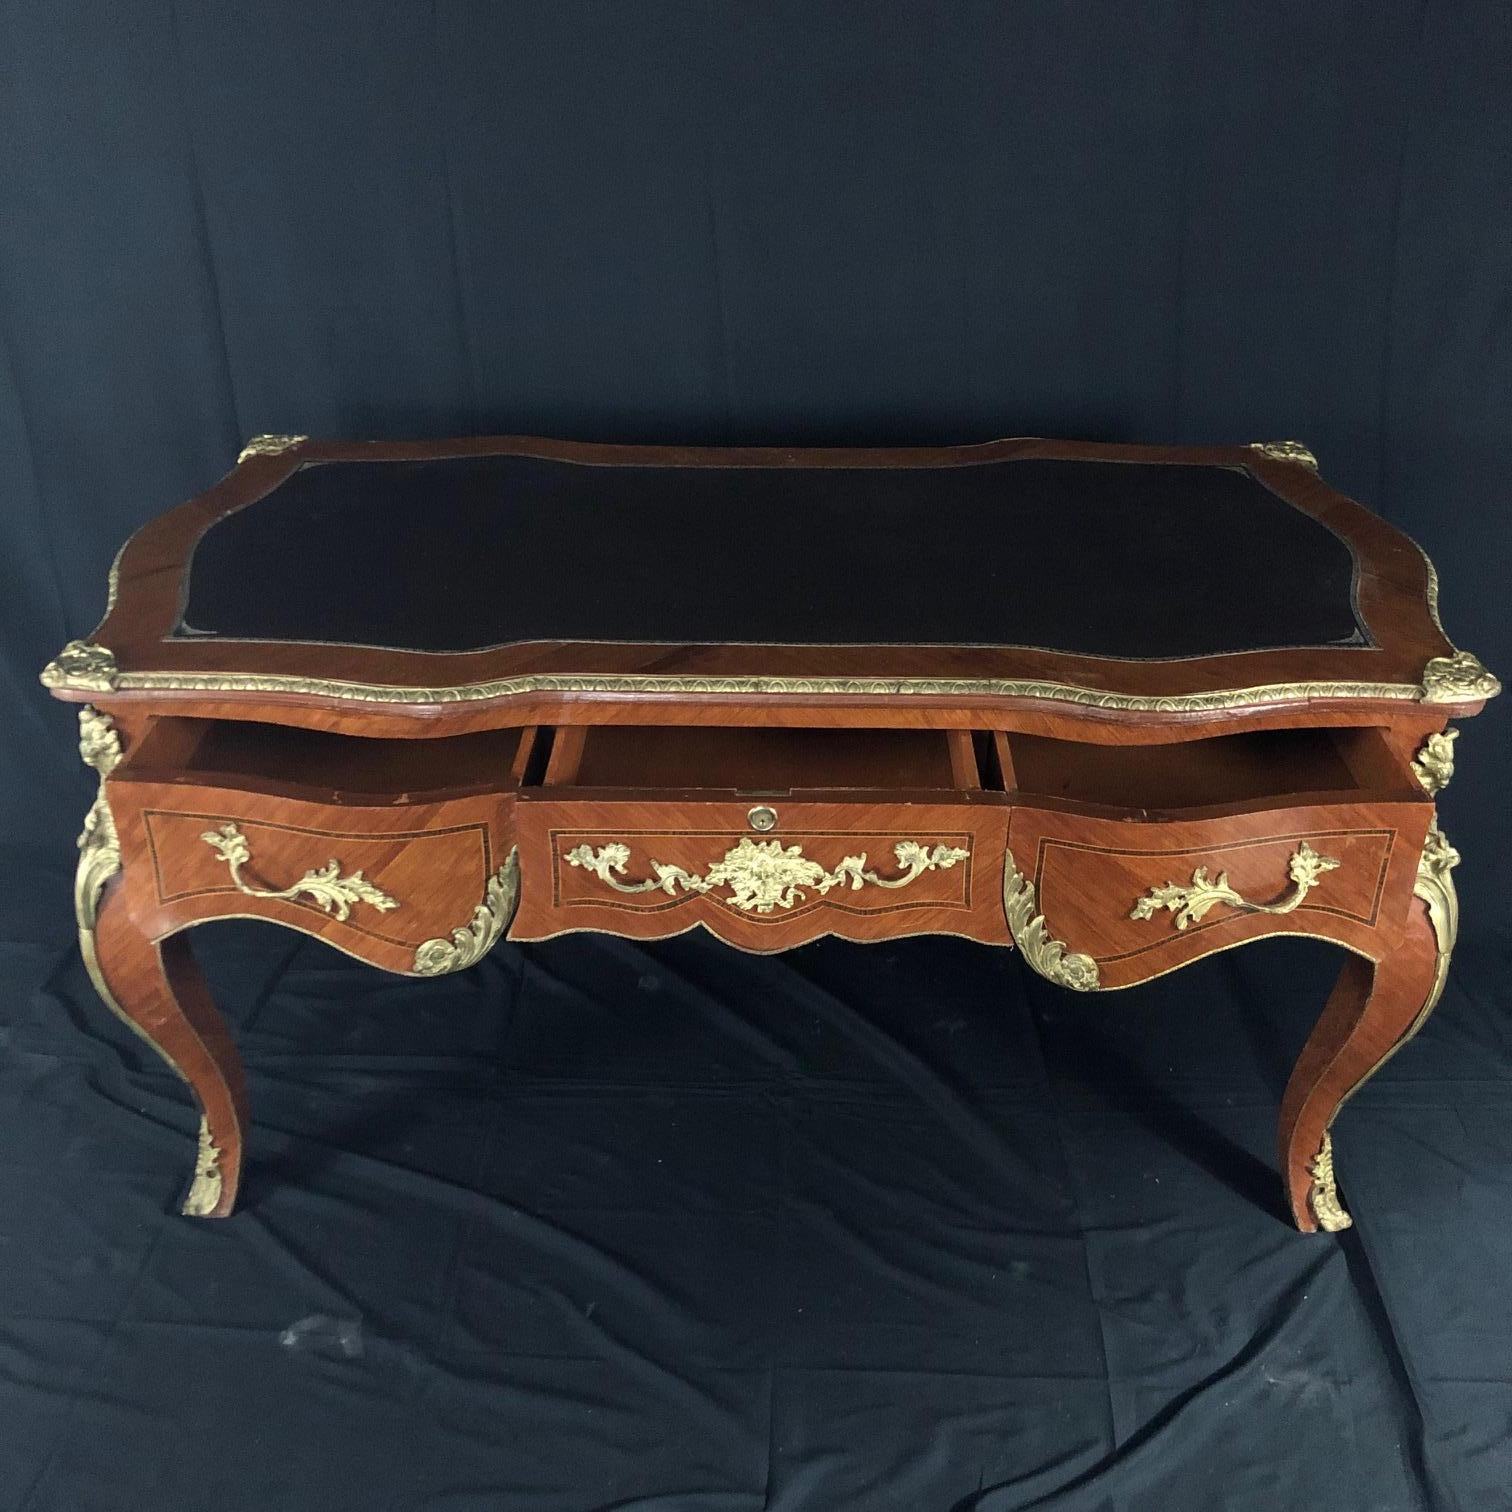 An elegant French Louis XV style walnut and ormolu gilt mounted figural bureau plat desk having rectangular top inset with a gilt tooled black leather writing panel, fitted with three apron drawers, raised on tapered cabriolet legs headed by finely